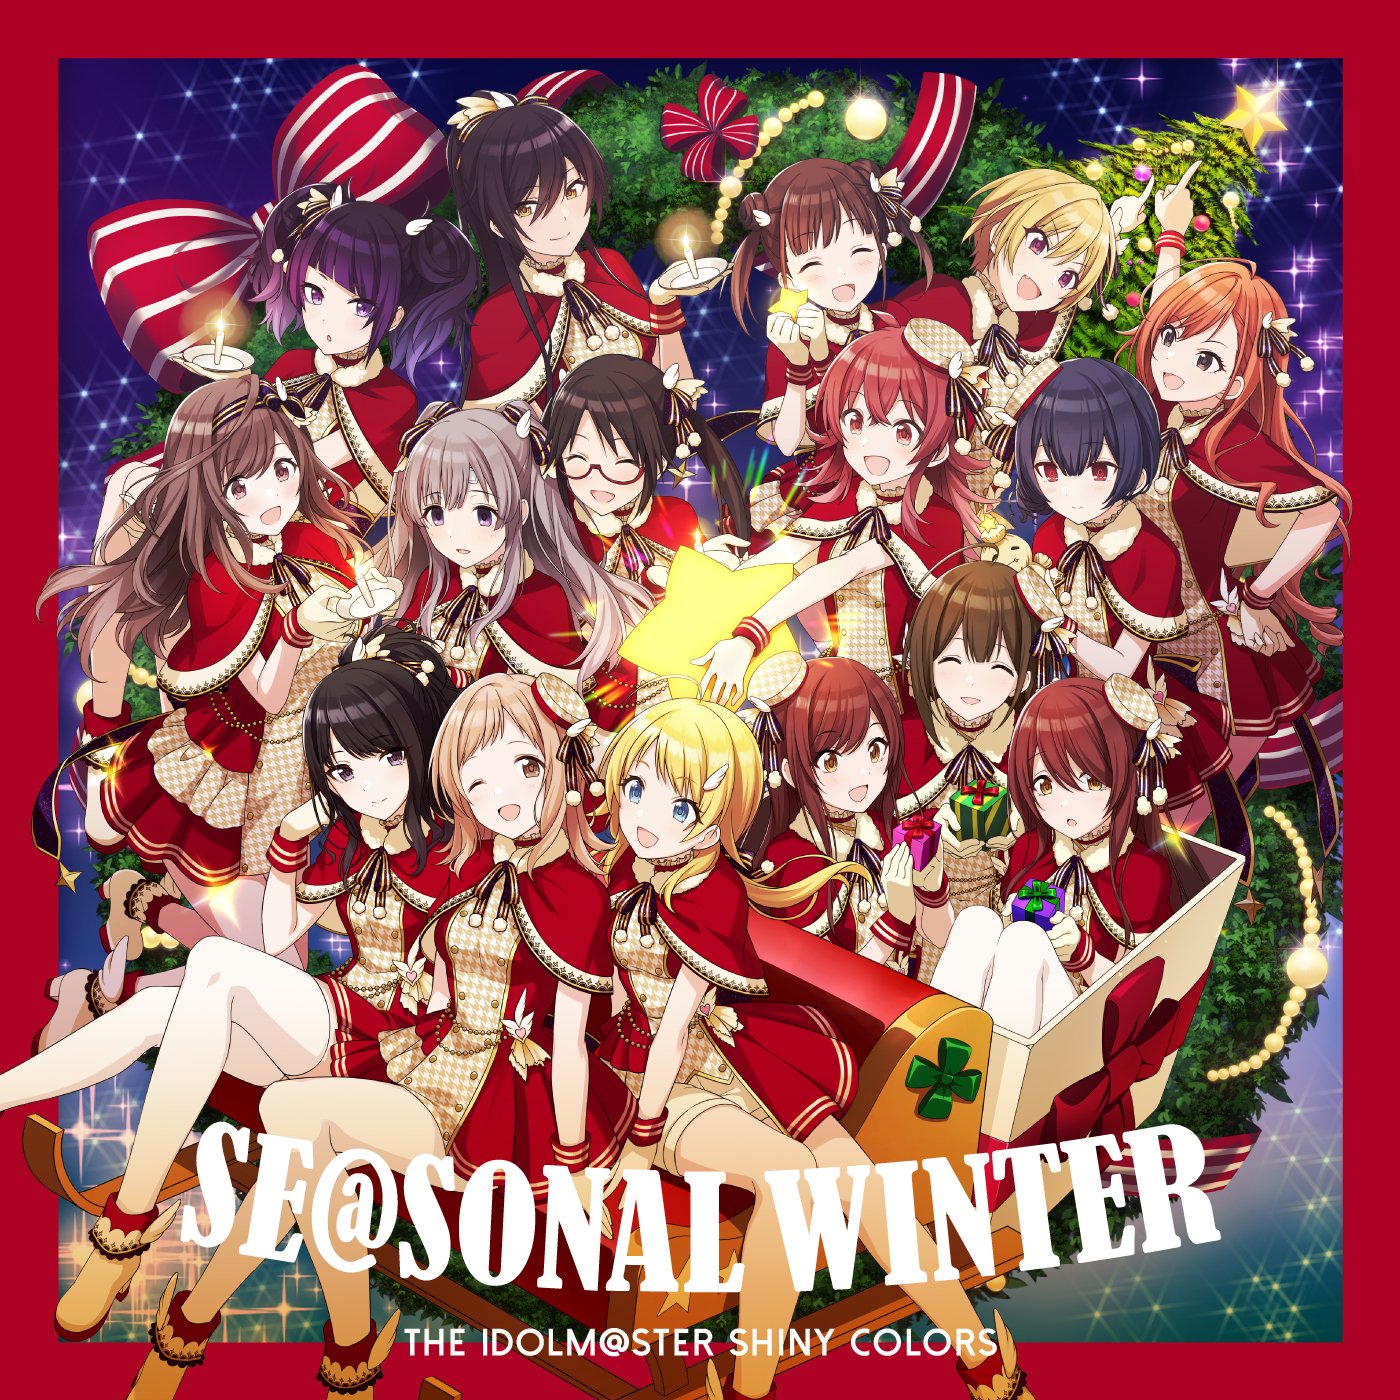 THE IDOLM@STER SHINY COLORS SE@SONAL WINTER.jpg